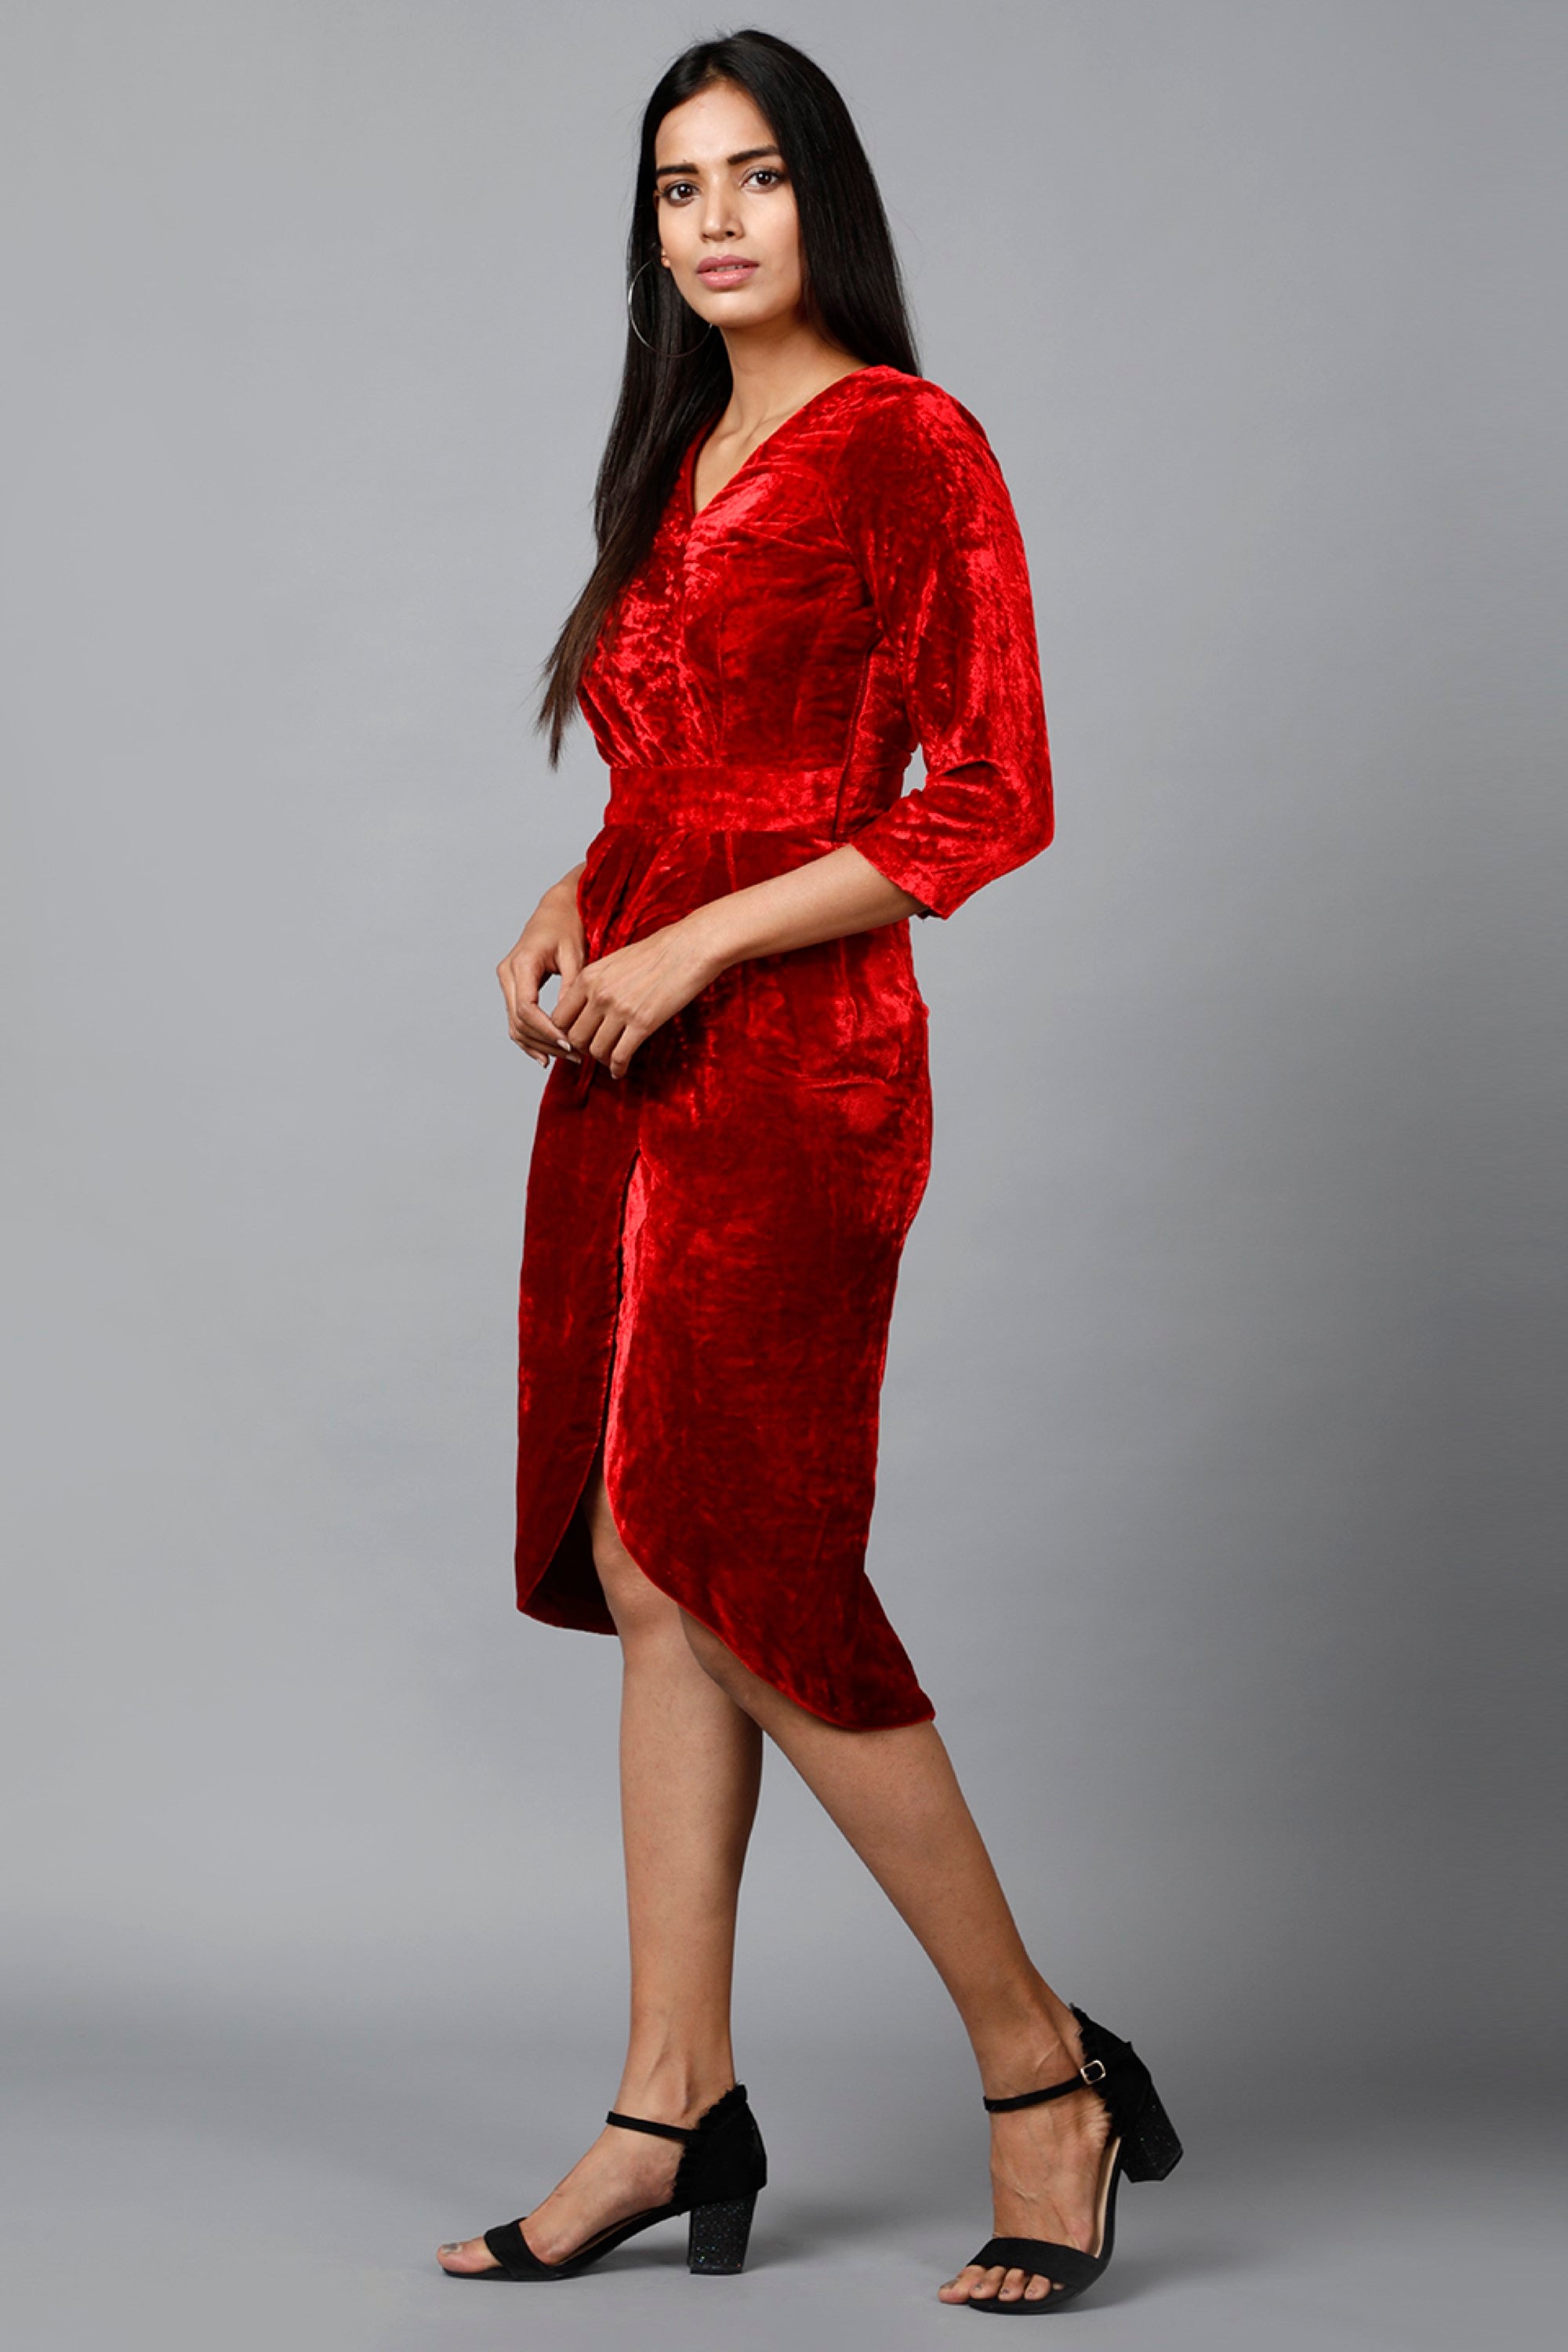 Women's Red Velvet Drape Party Dress - MIRACOLOS by Ruchi